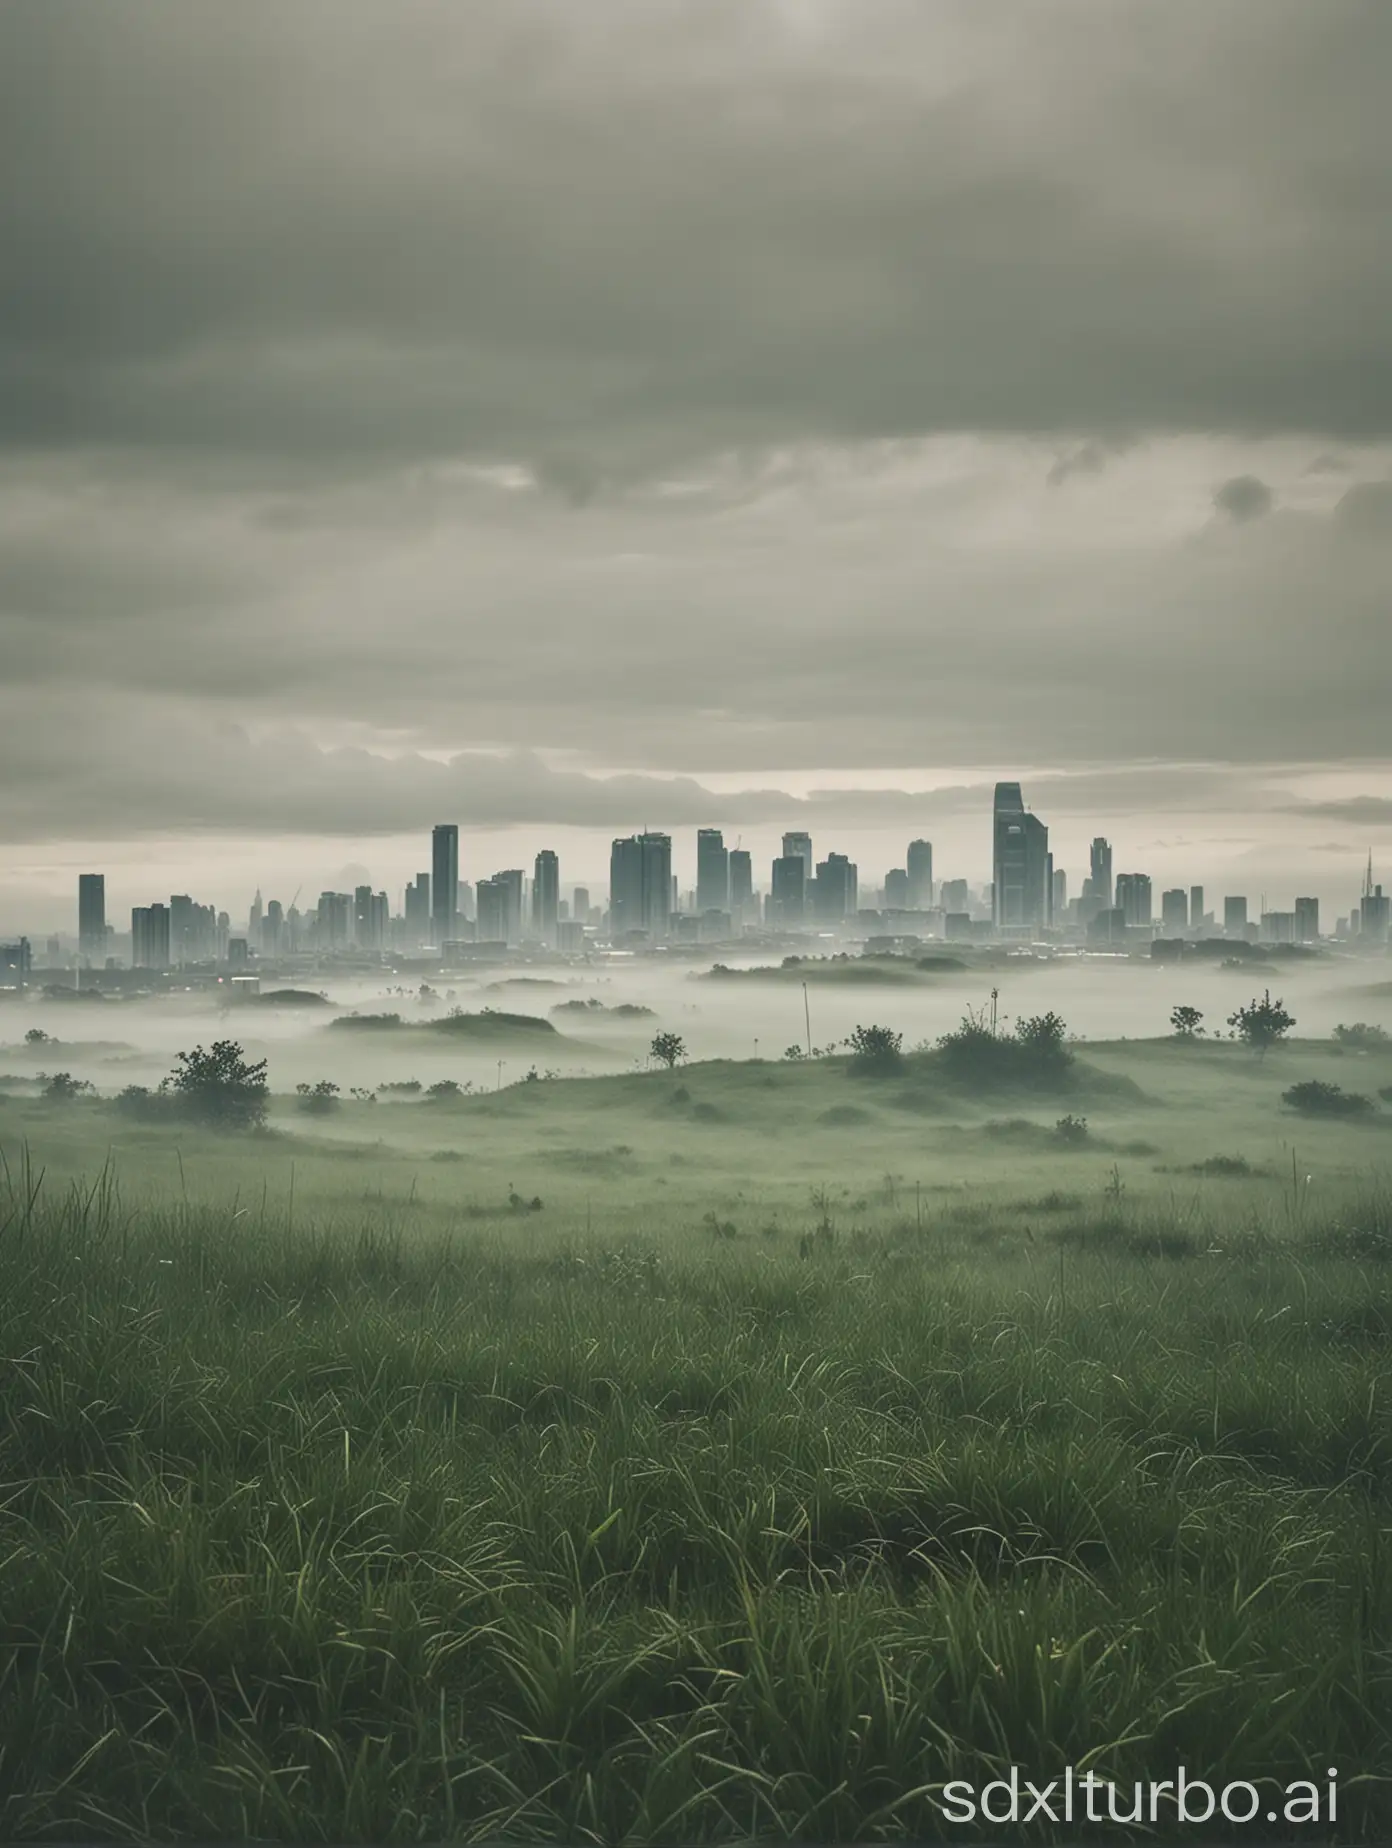 A grassland, clouds block a planet in the sky, the end of the grassland is a future city, fog blocking the city, the city has ultra-high buildings, the distant city has spaceships, cloudy, rainy days, cloudy, days, a real photo pentax 55mm f/1.6 helios-44m